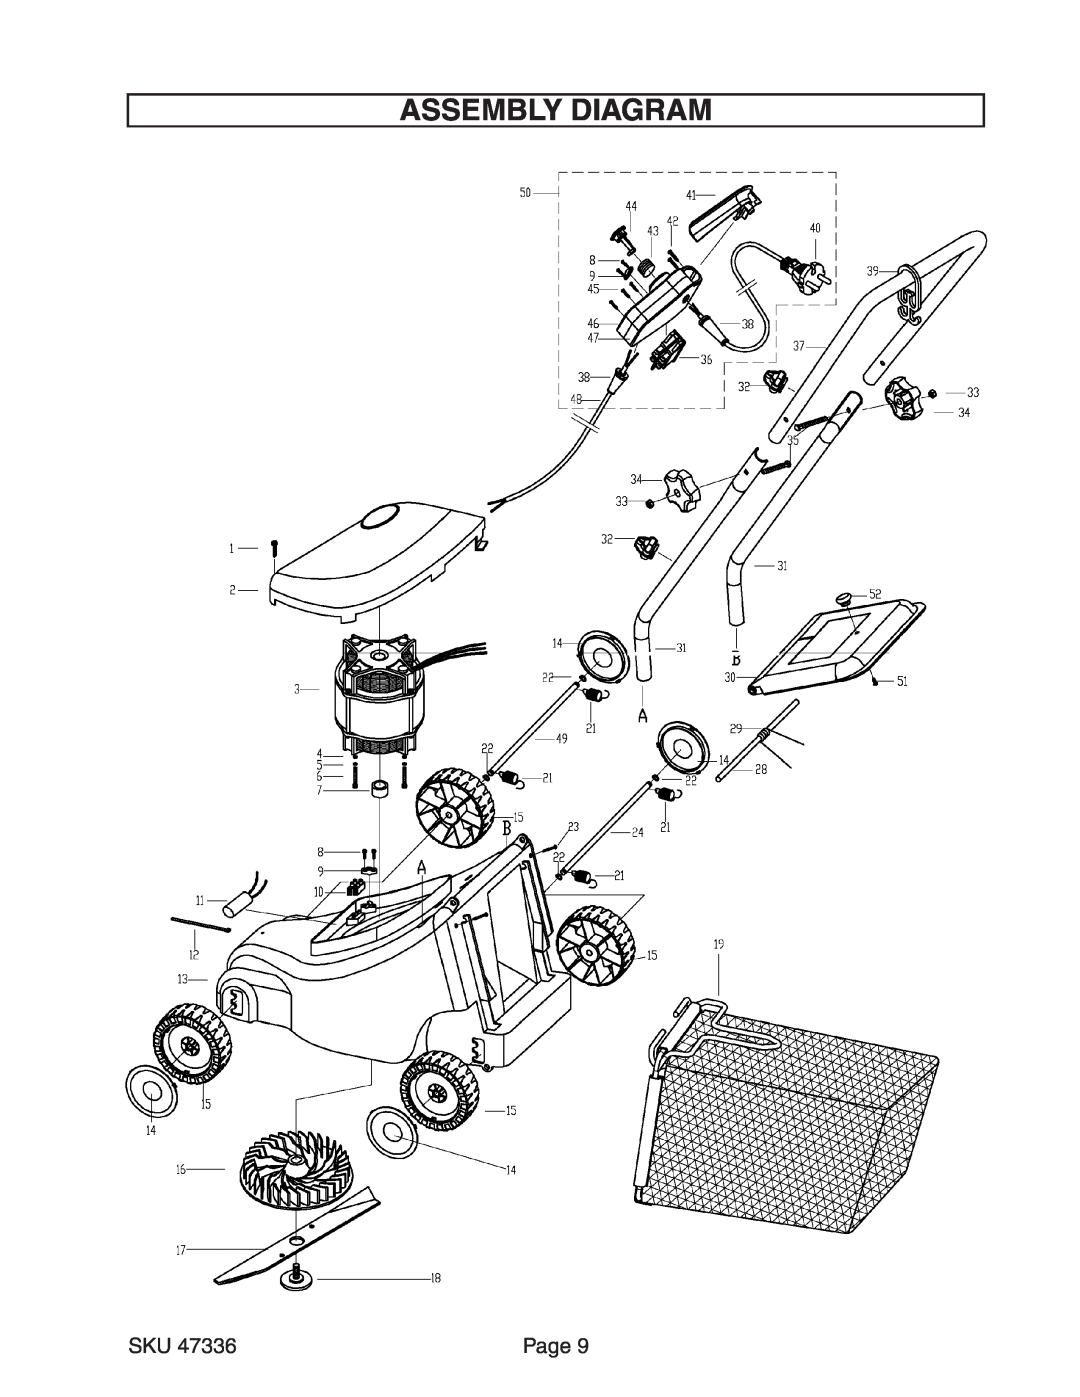 Harbor Freight Tools 47336 manual Assembly Diagram, Page 